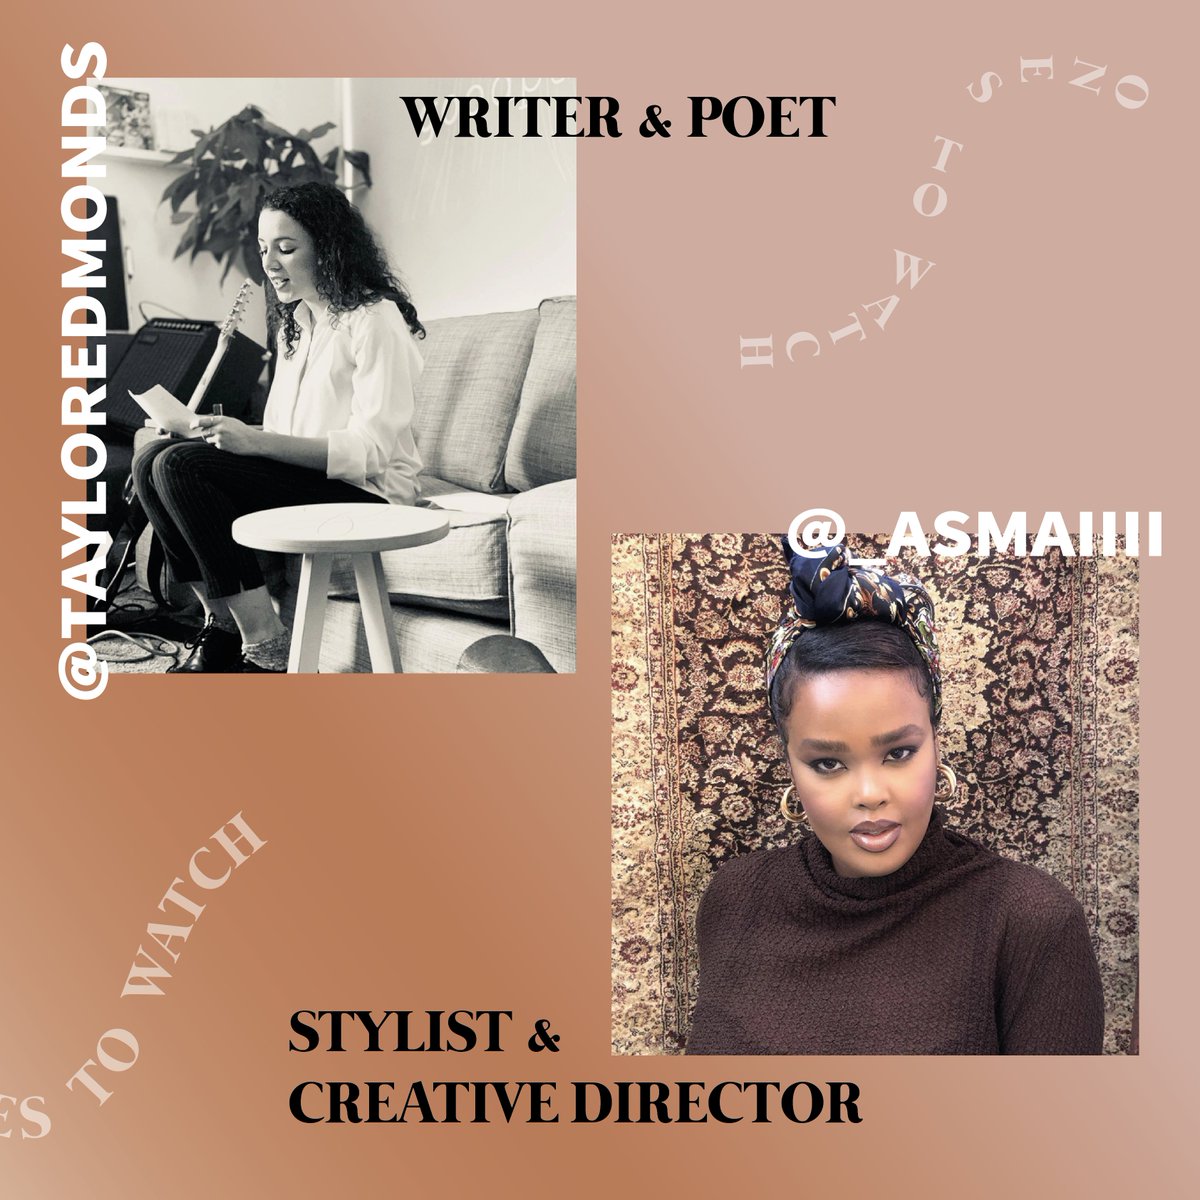 Black Welsh Creatives. Our new series celebrating the Incredible talent in Wales. This week we're sharing our round up of ones to watch, so get them on your radar!